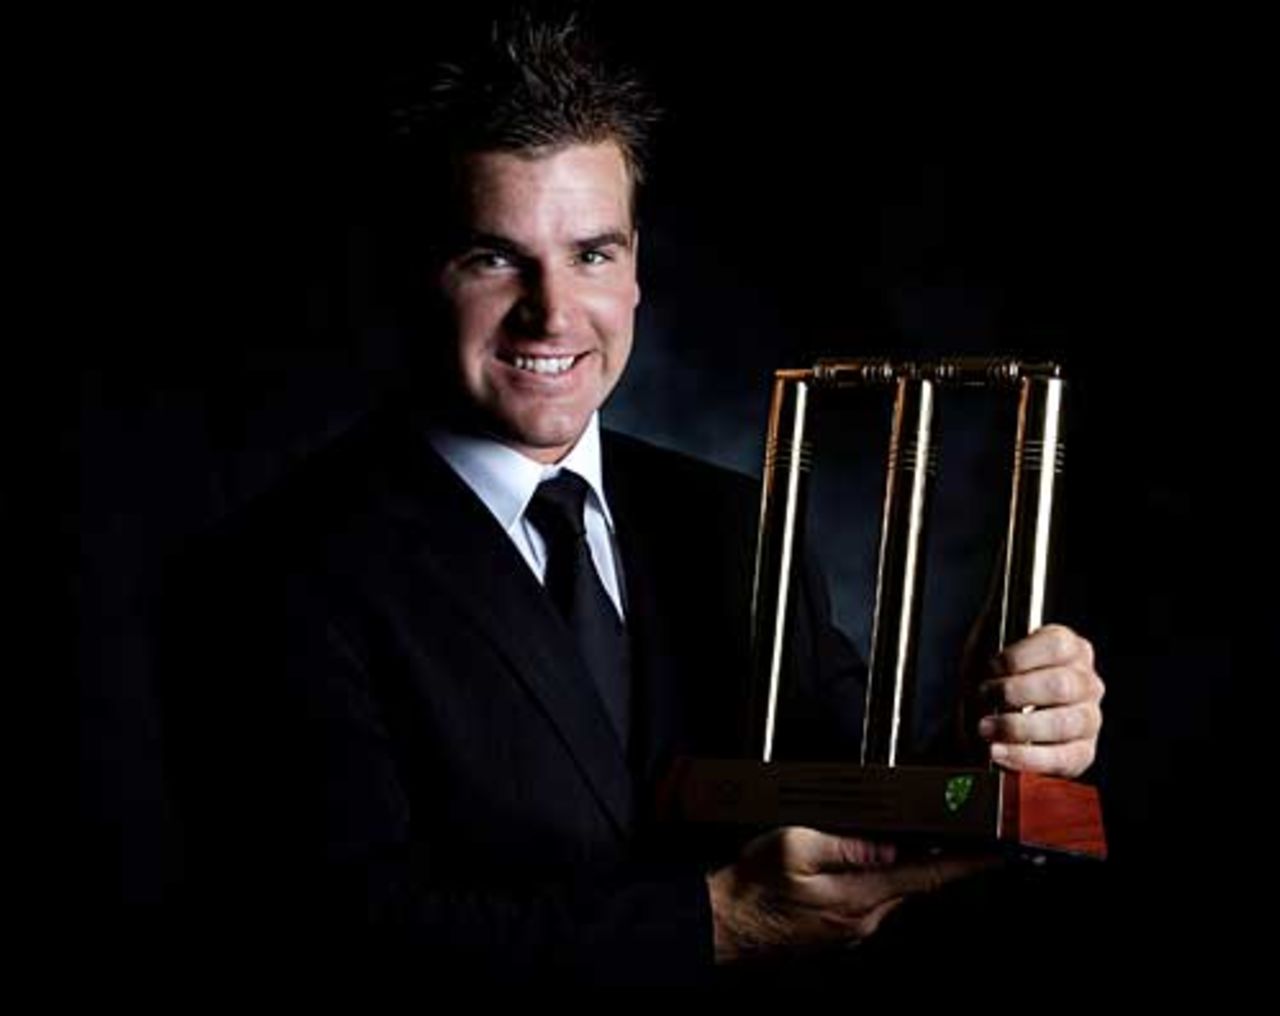 Luke Pomersbach was named Bradman Young Player of the Year, Allan Border Medal, Melbourne, February 26, 2008